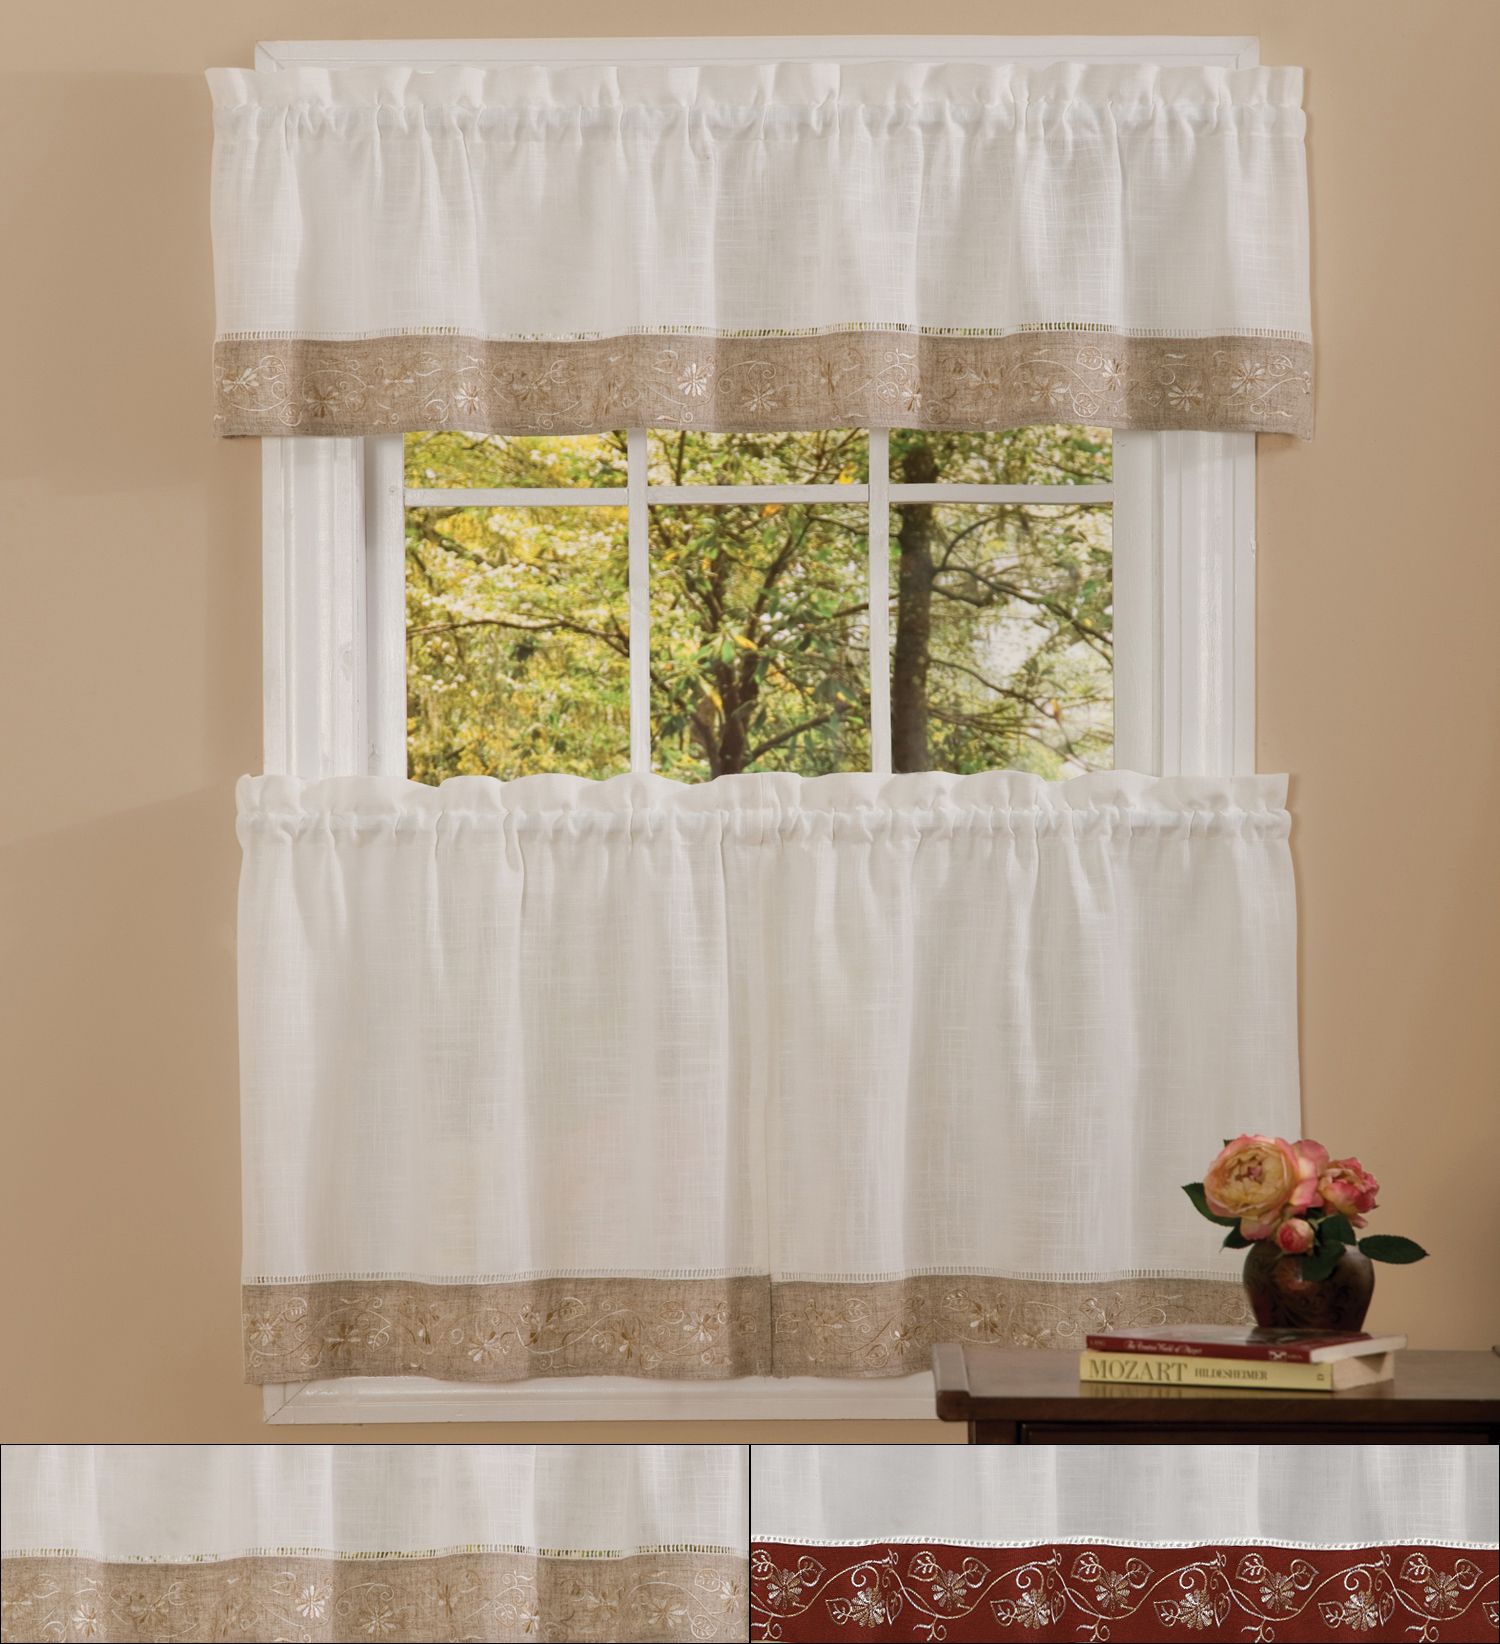 Details About Oakwood Linen Style Kitchen Window Curtain 24" Tiers &  Valance Set Pertaining To Oakwood Linen Style Decorative Window Curtain Tier Sets (View 2 of 20)